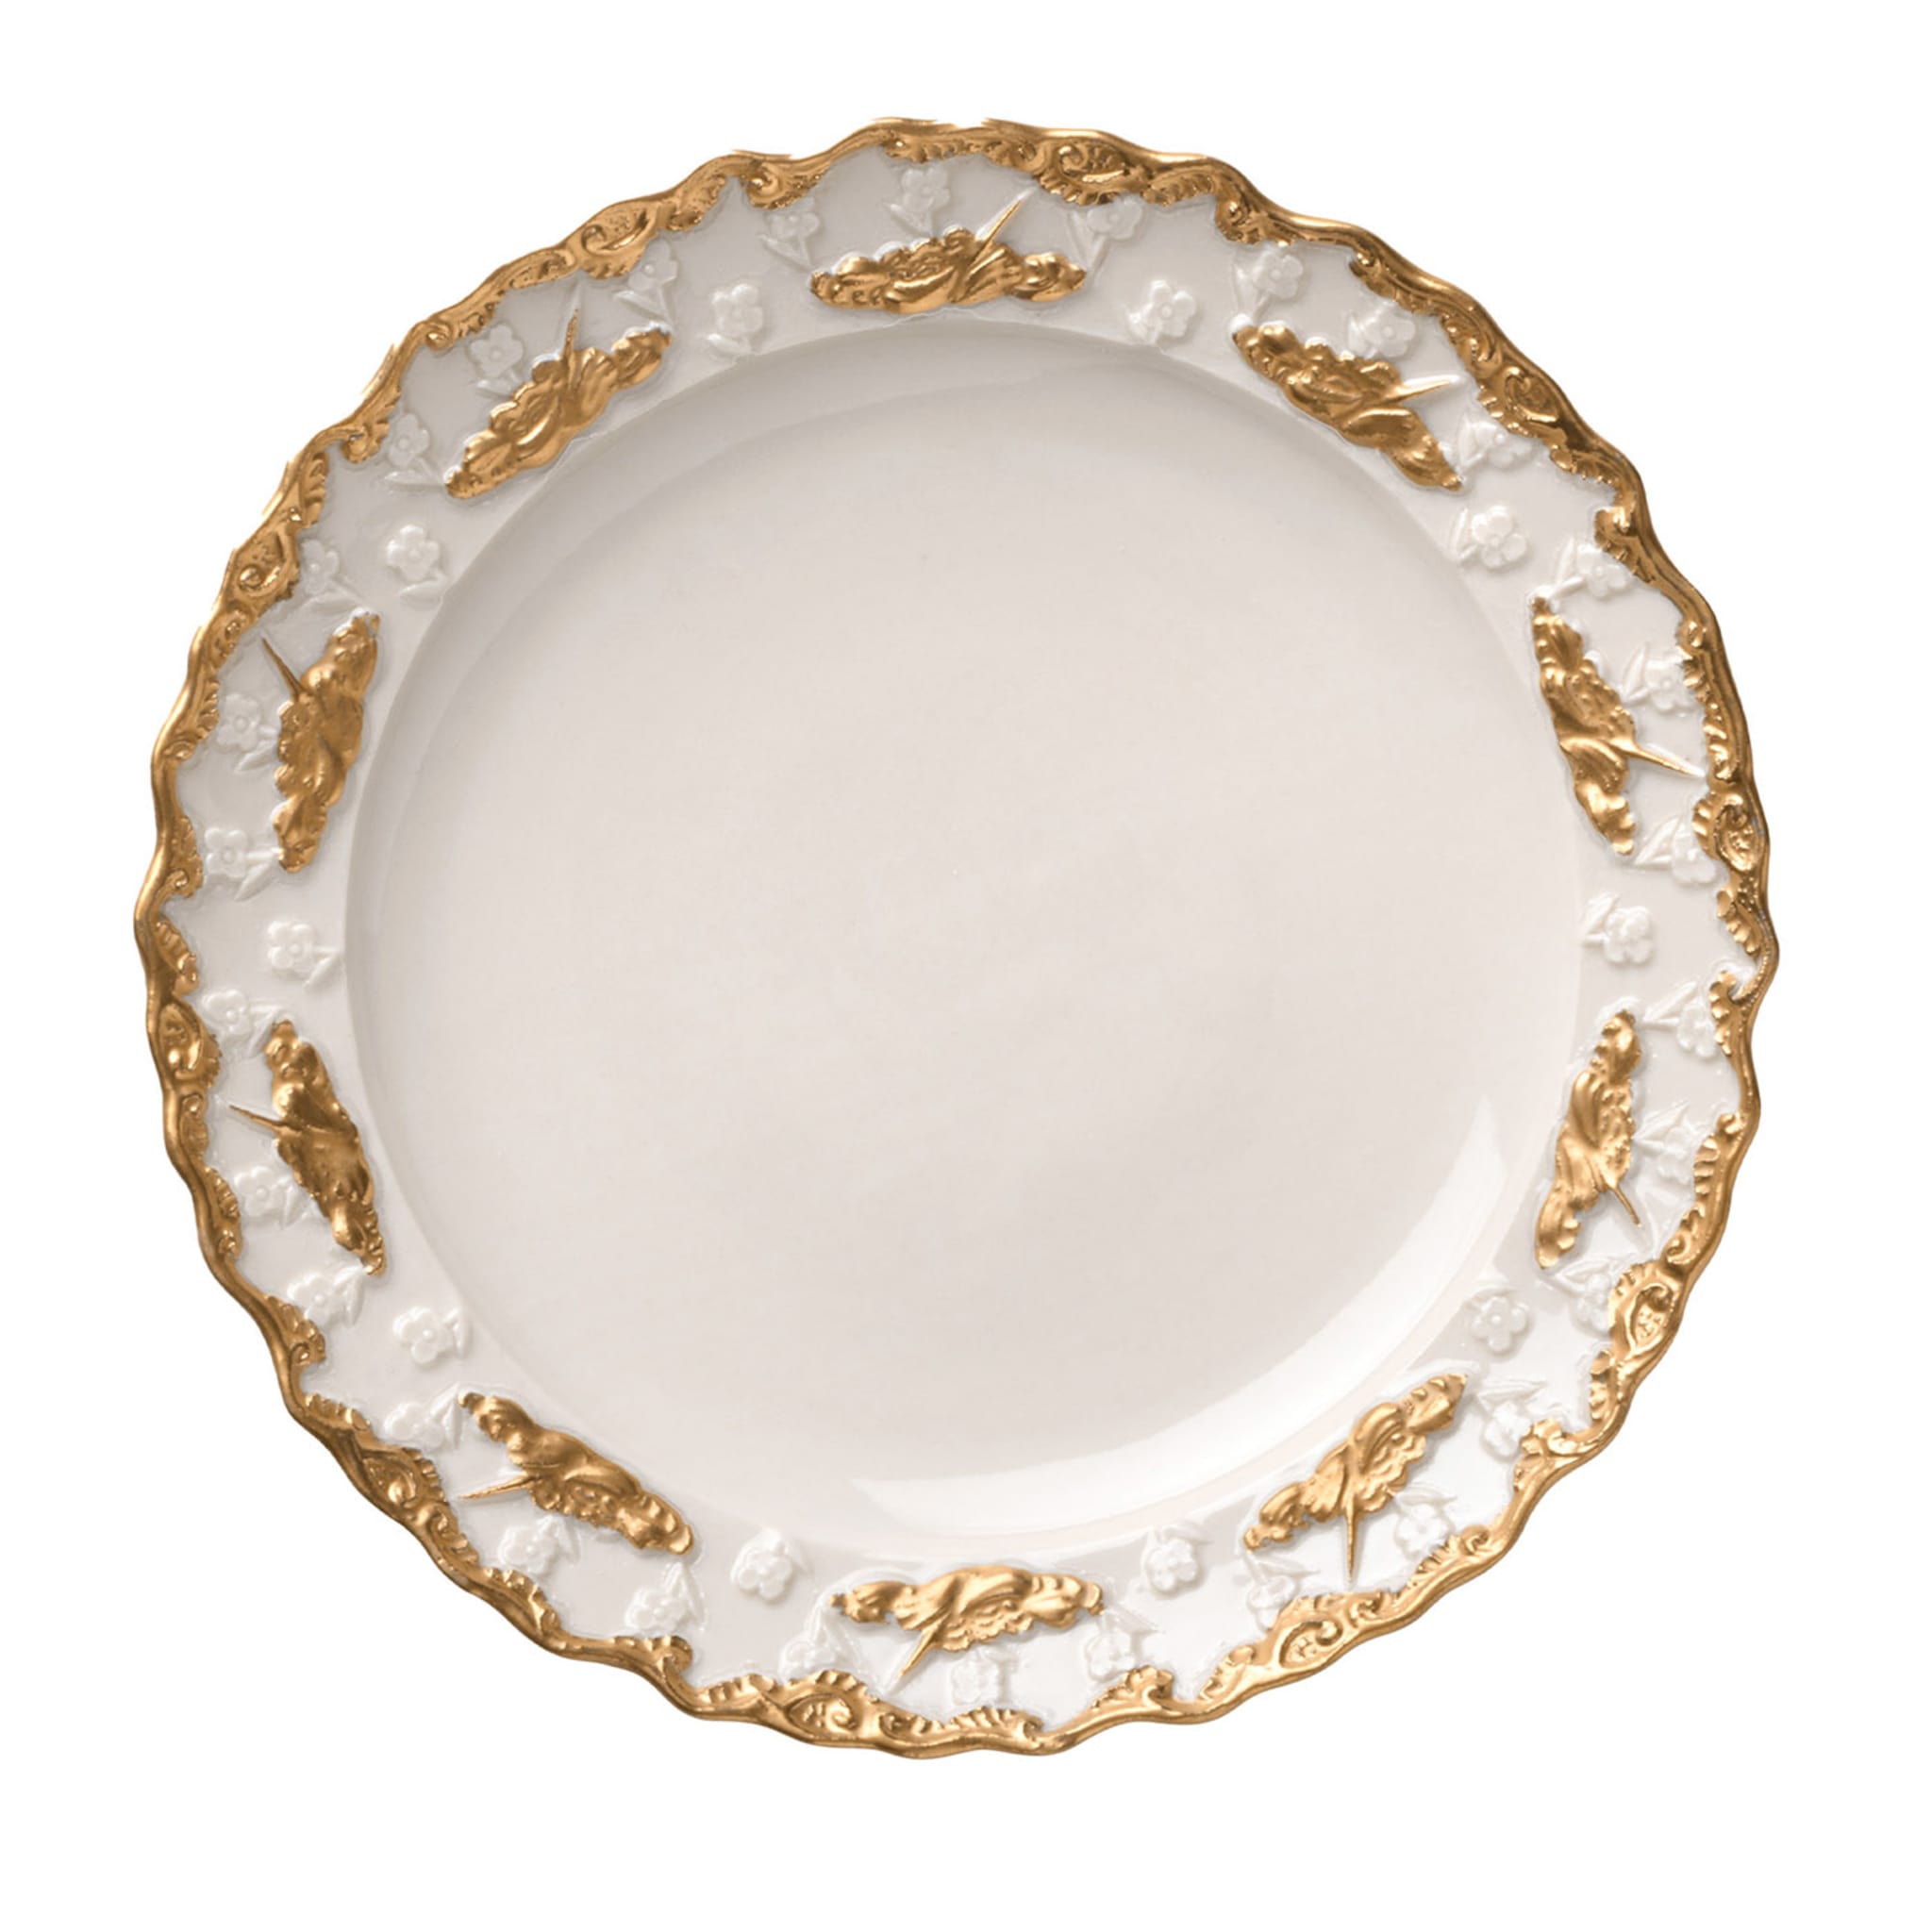 Lucia Set of 2 White & Gold Bread Plates - Main view